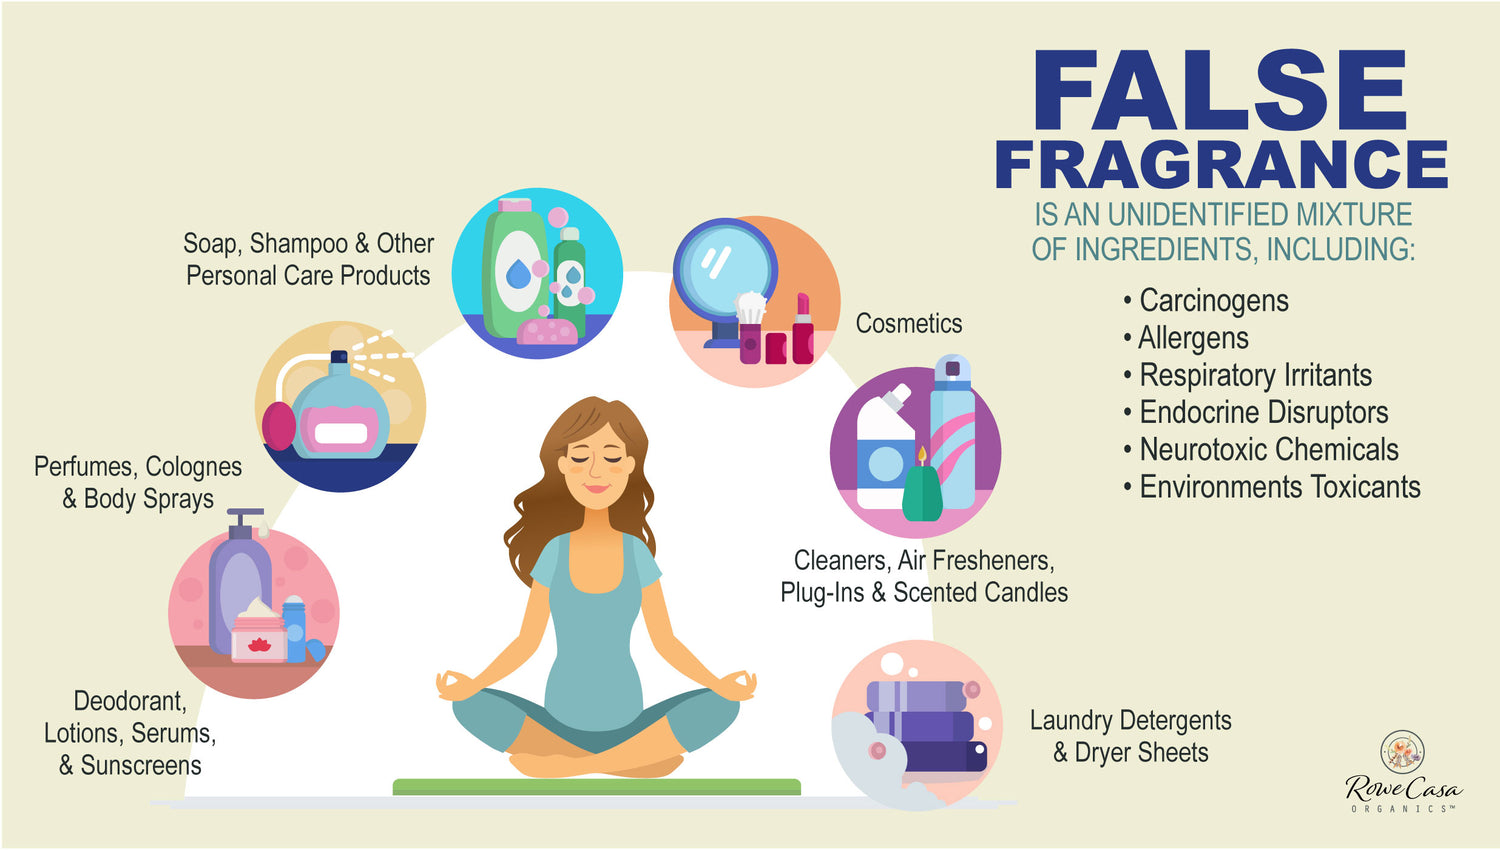 Say “Goodbye” to FALSE FRAGRANCE—<i>Your health depends on it!</i>